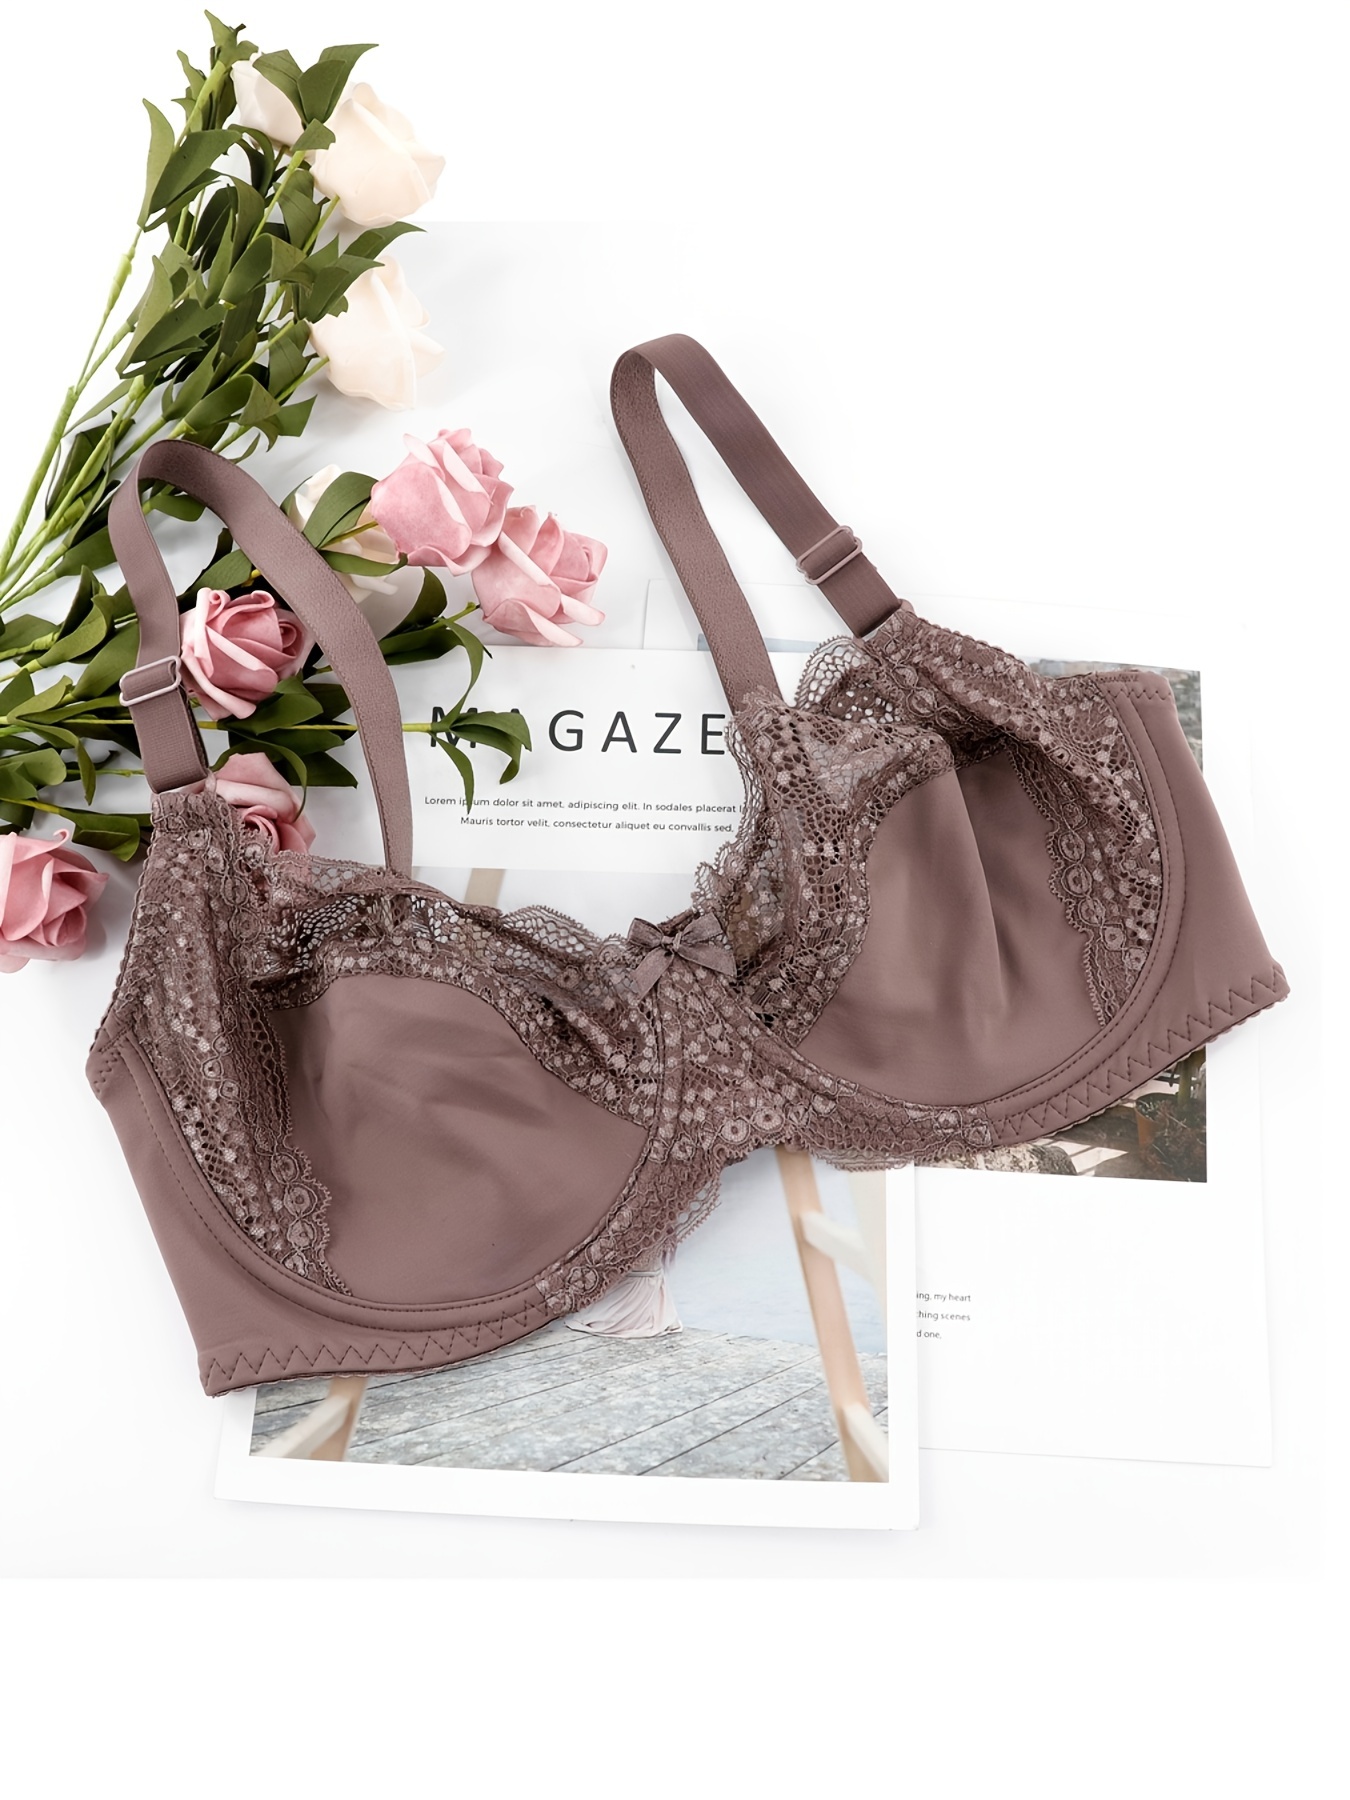 Seductive bra, partially sheer cups, floral lace, A to D-cup